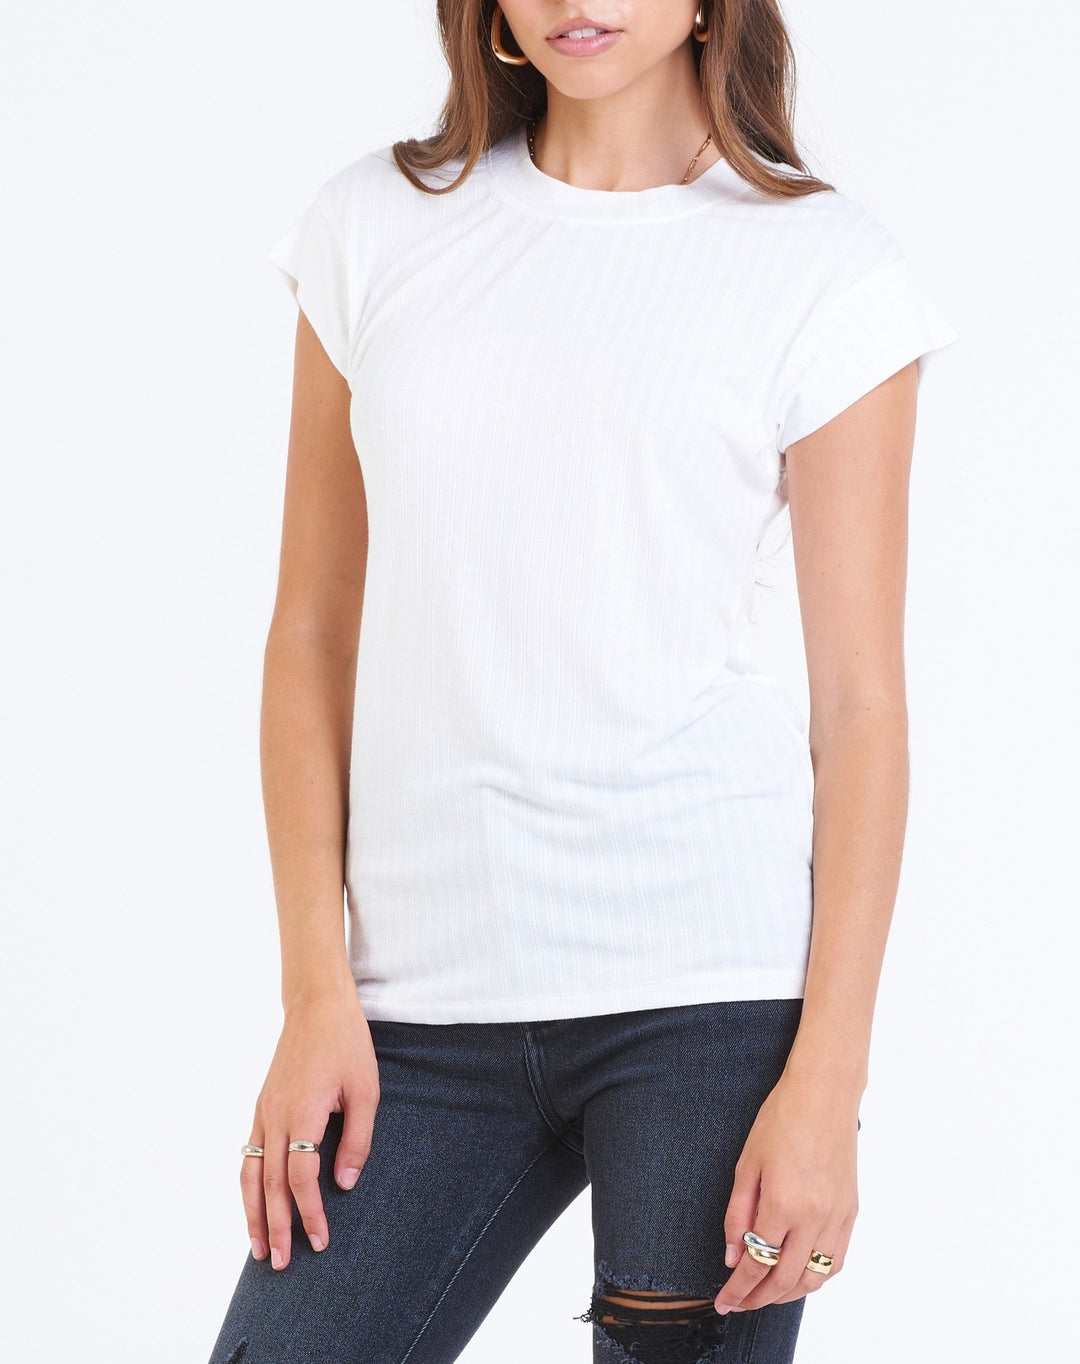 image of a female model wearing a GABBY VERIGATED RIBBED TOP WHITE TOPS